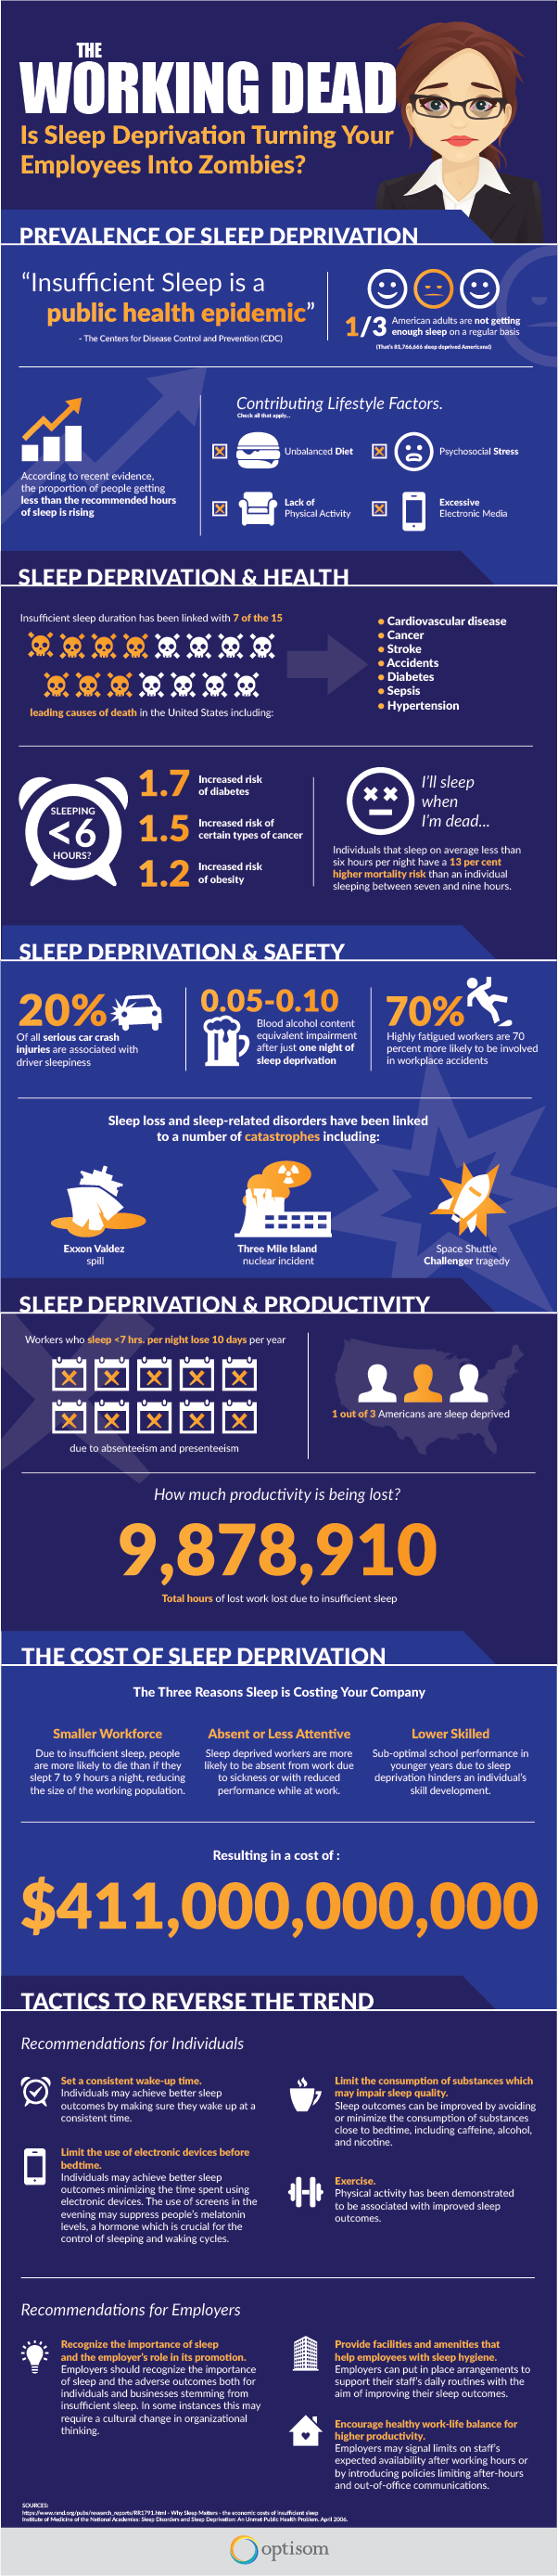 Is Sleep Deprivation Turning Your Employees Into Zombies?